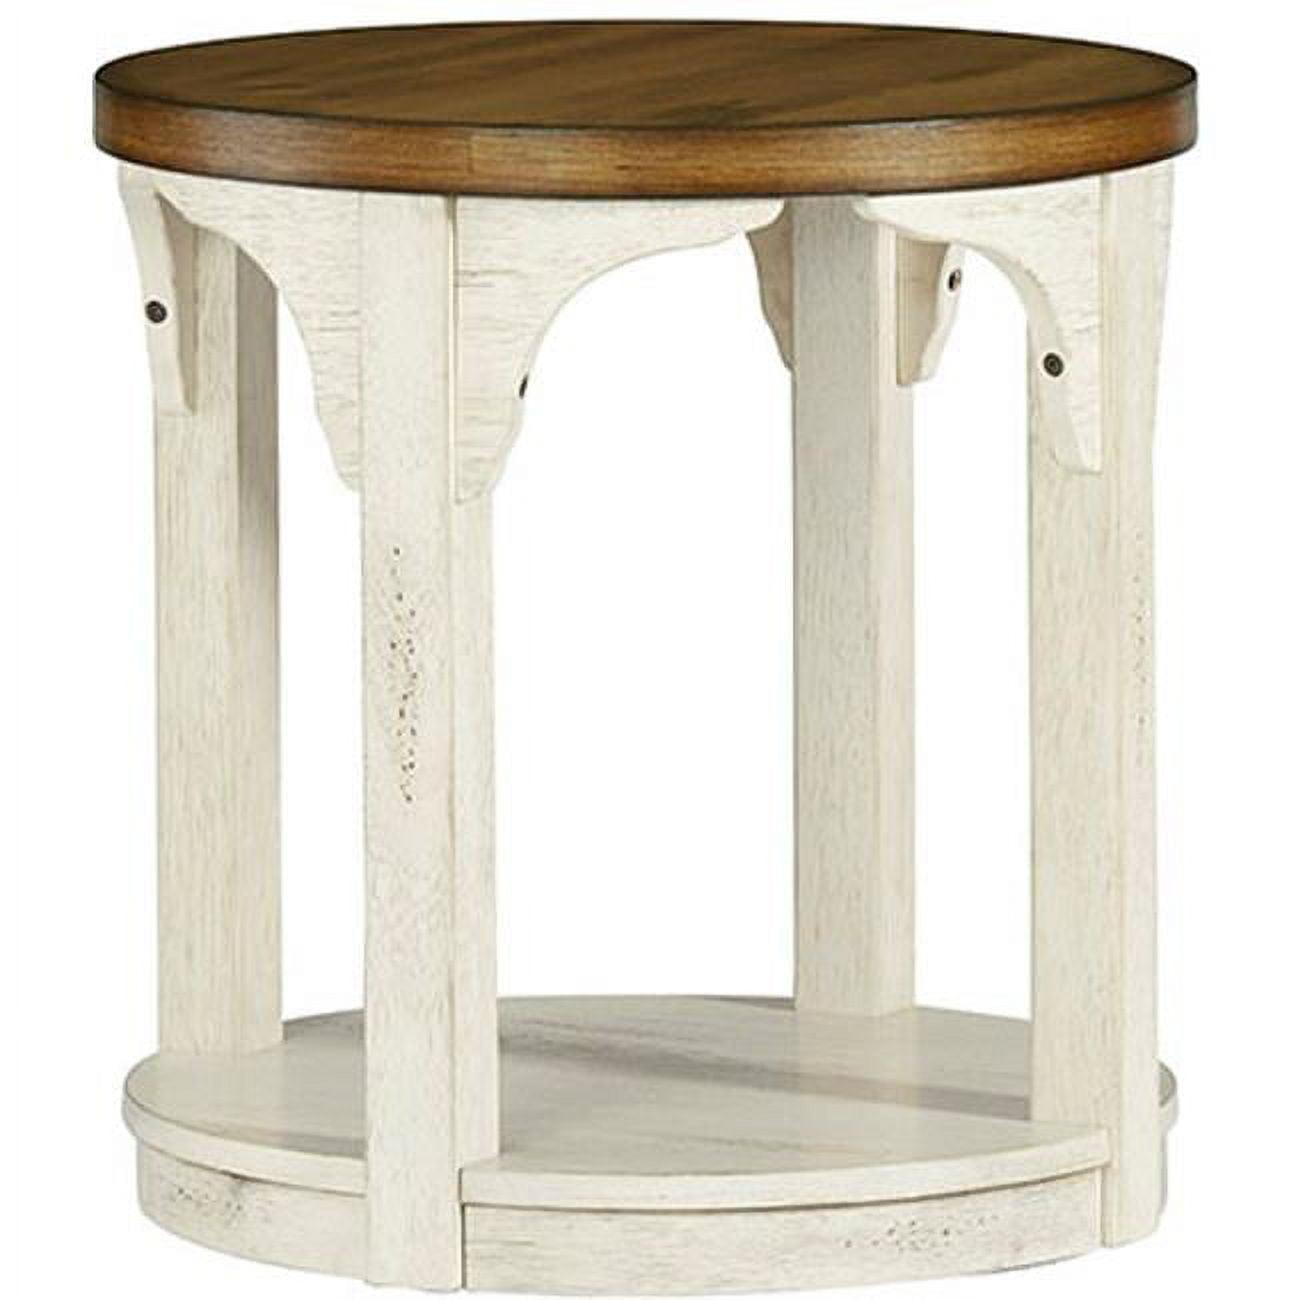 Casual Farmhouse Round End Table in Oak and Antique White, 24"